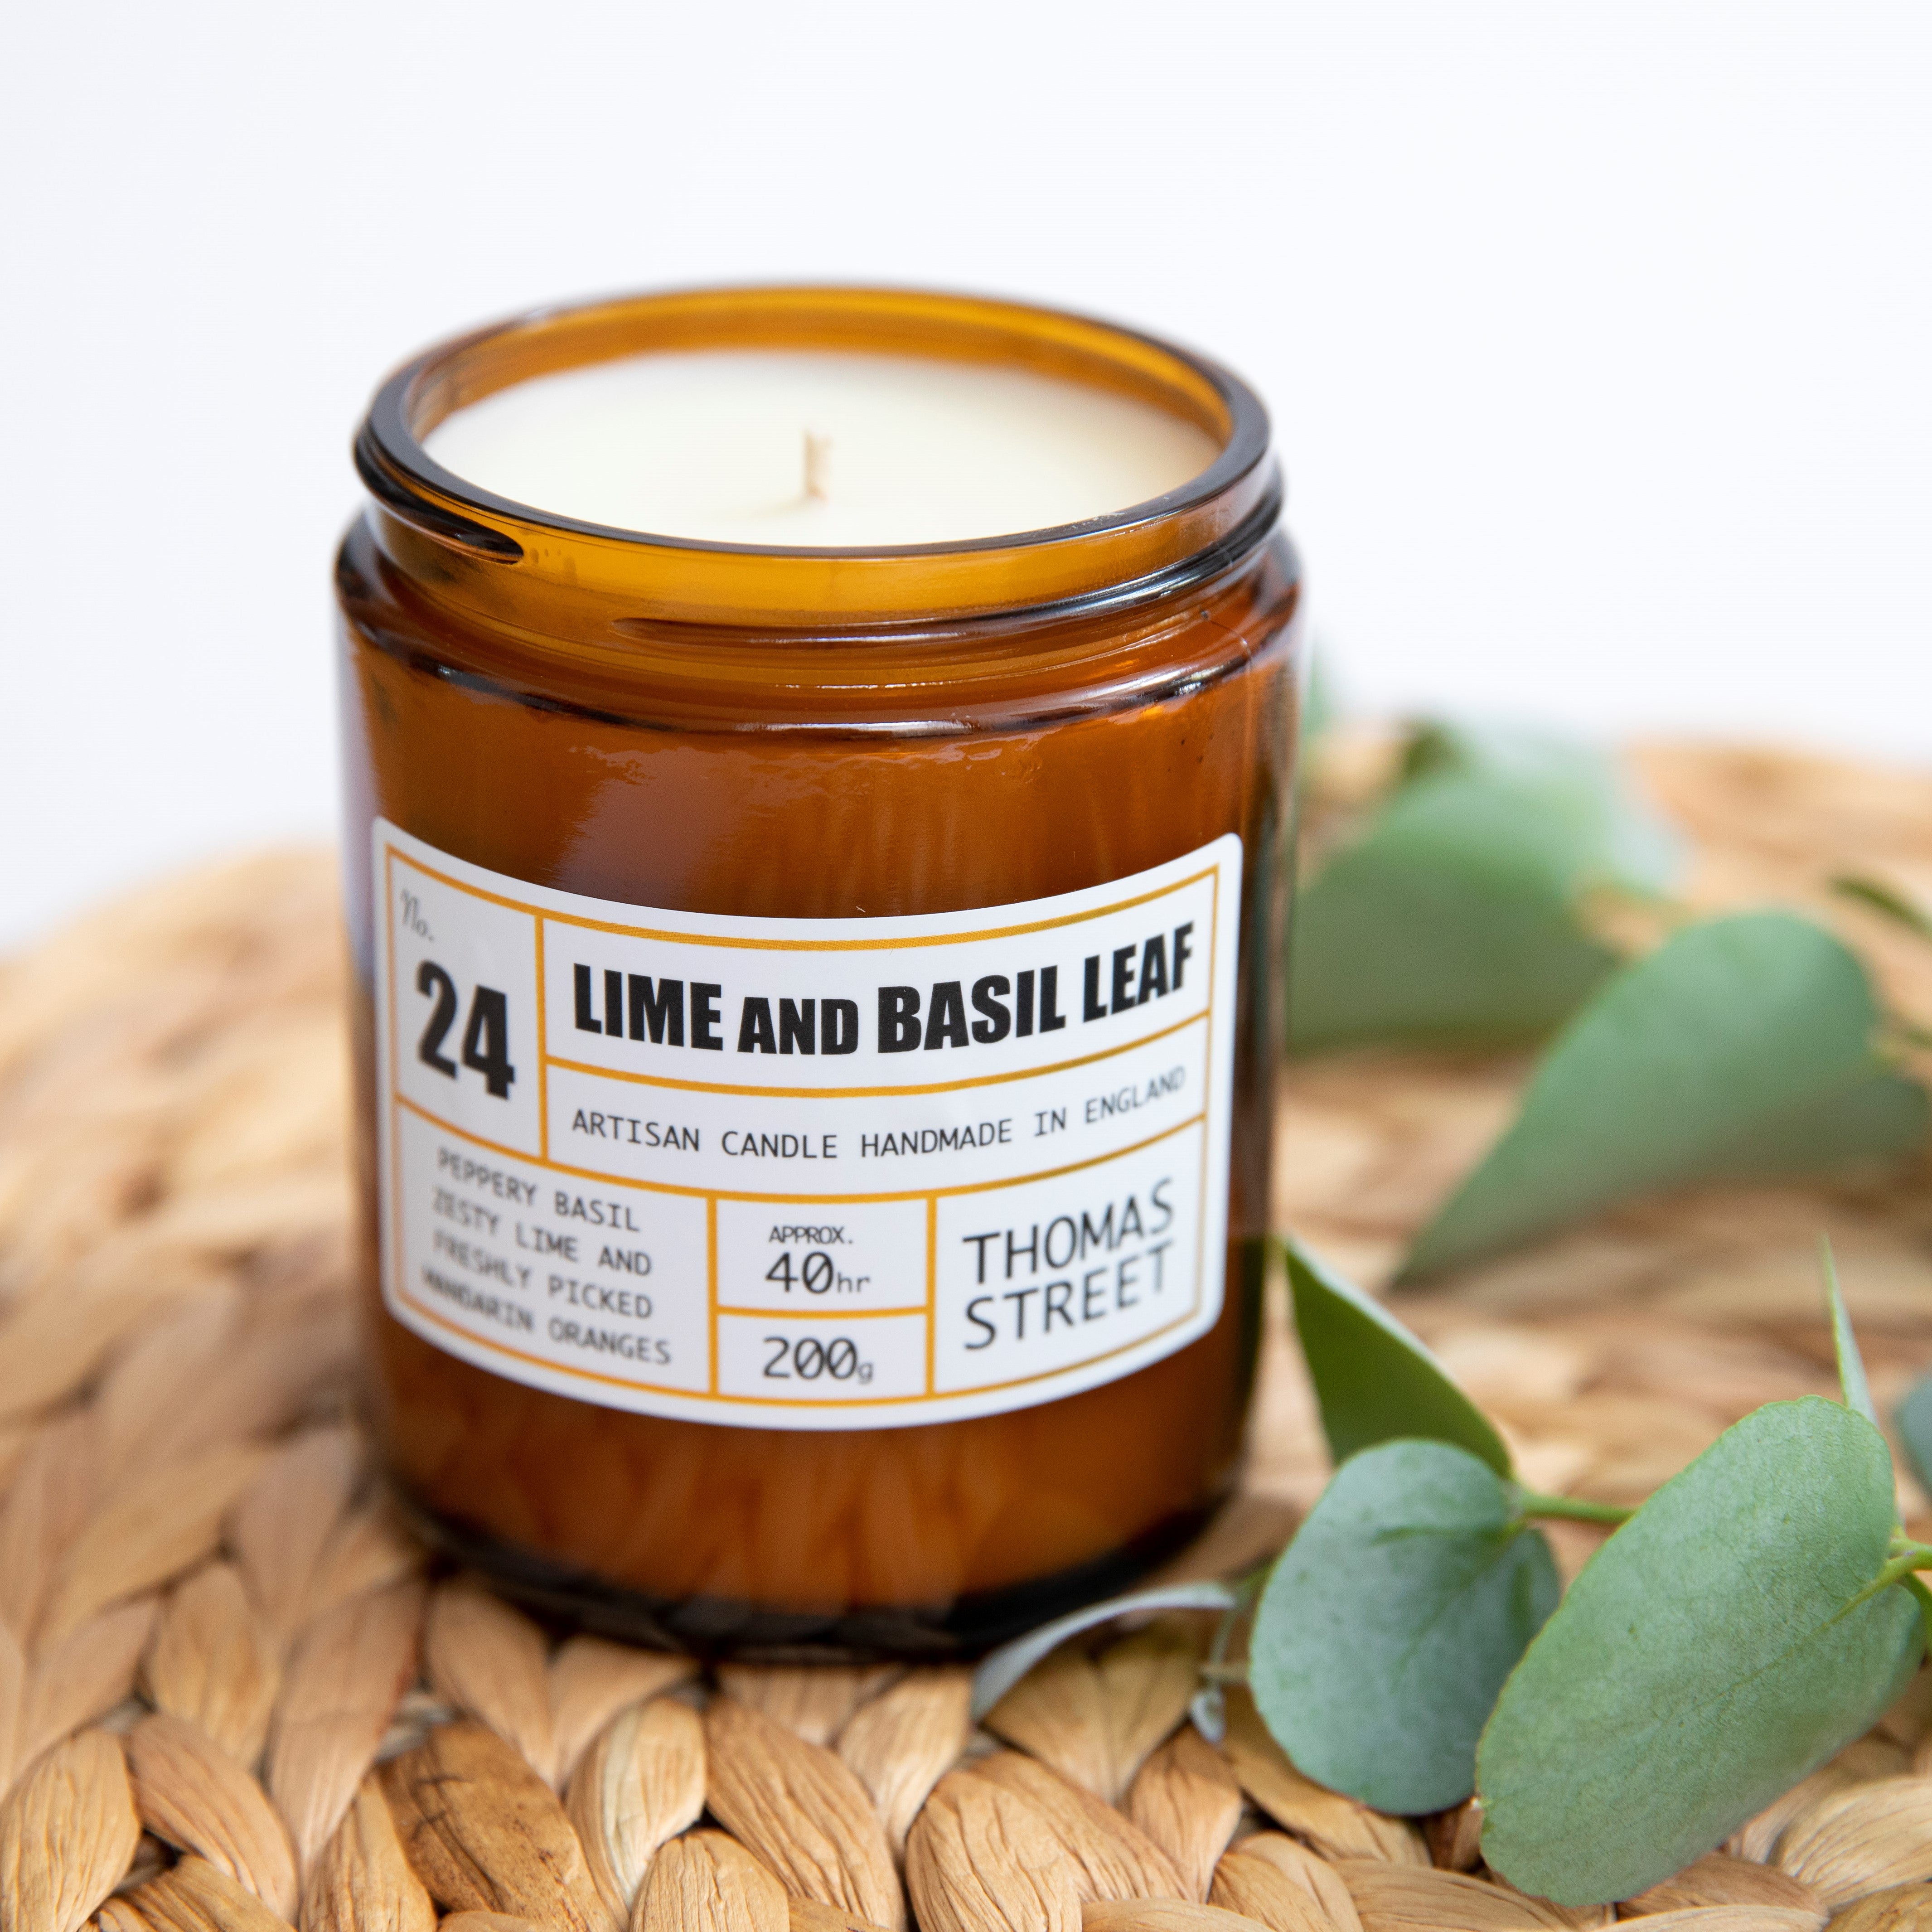 Lime and Basil Leaf Vegan Soy Wax Candle in a Glass Jar